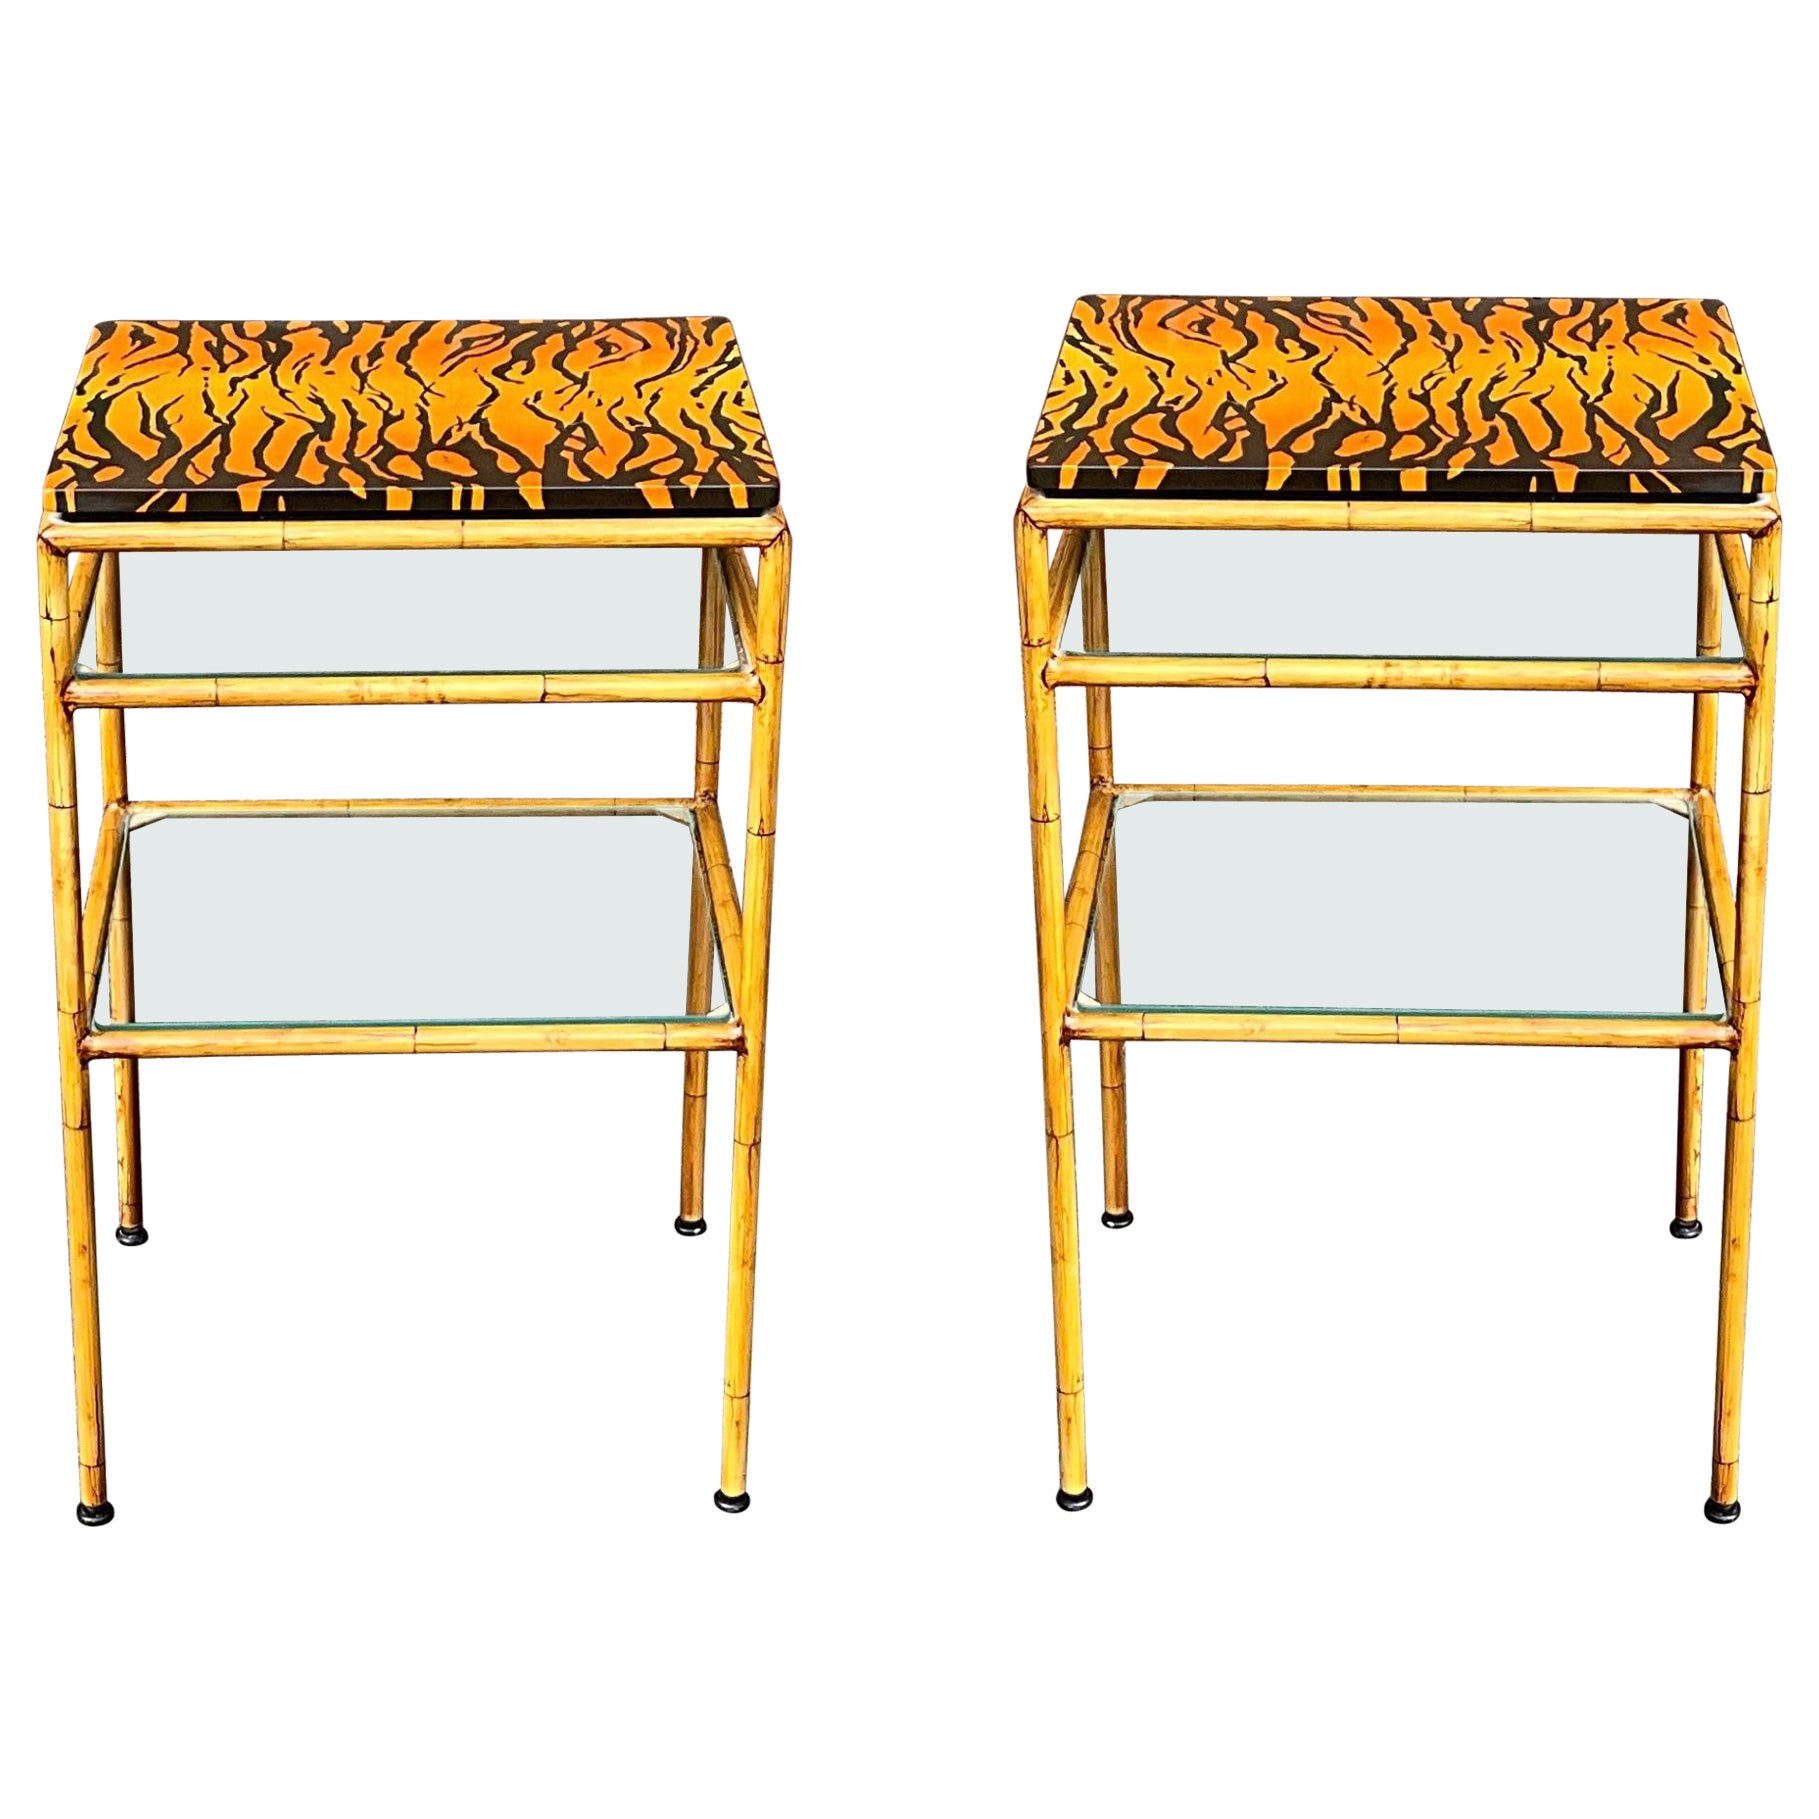 Regency Style Faux Bamboo Tole Side Tables W/ Hand Painted Tiger Tops - Pair